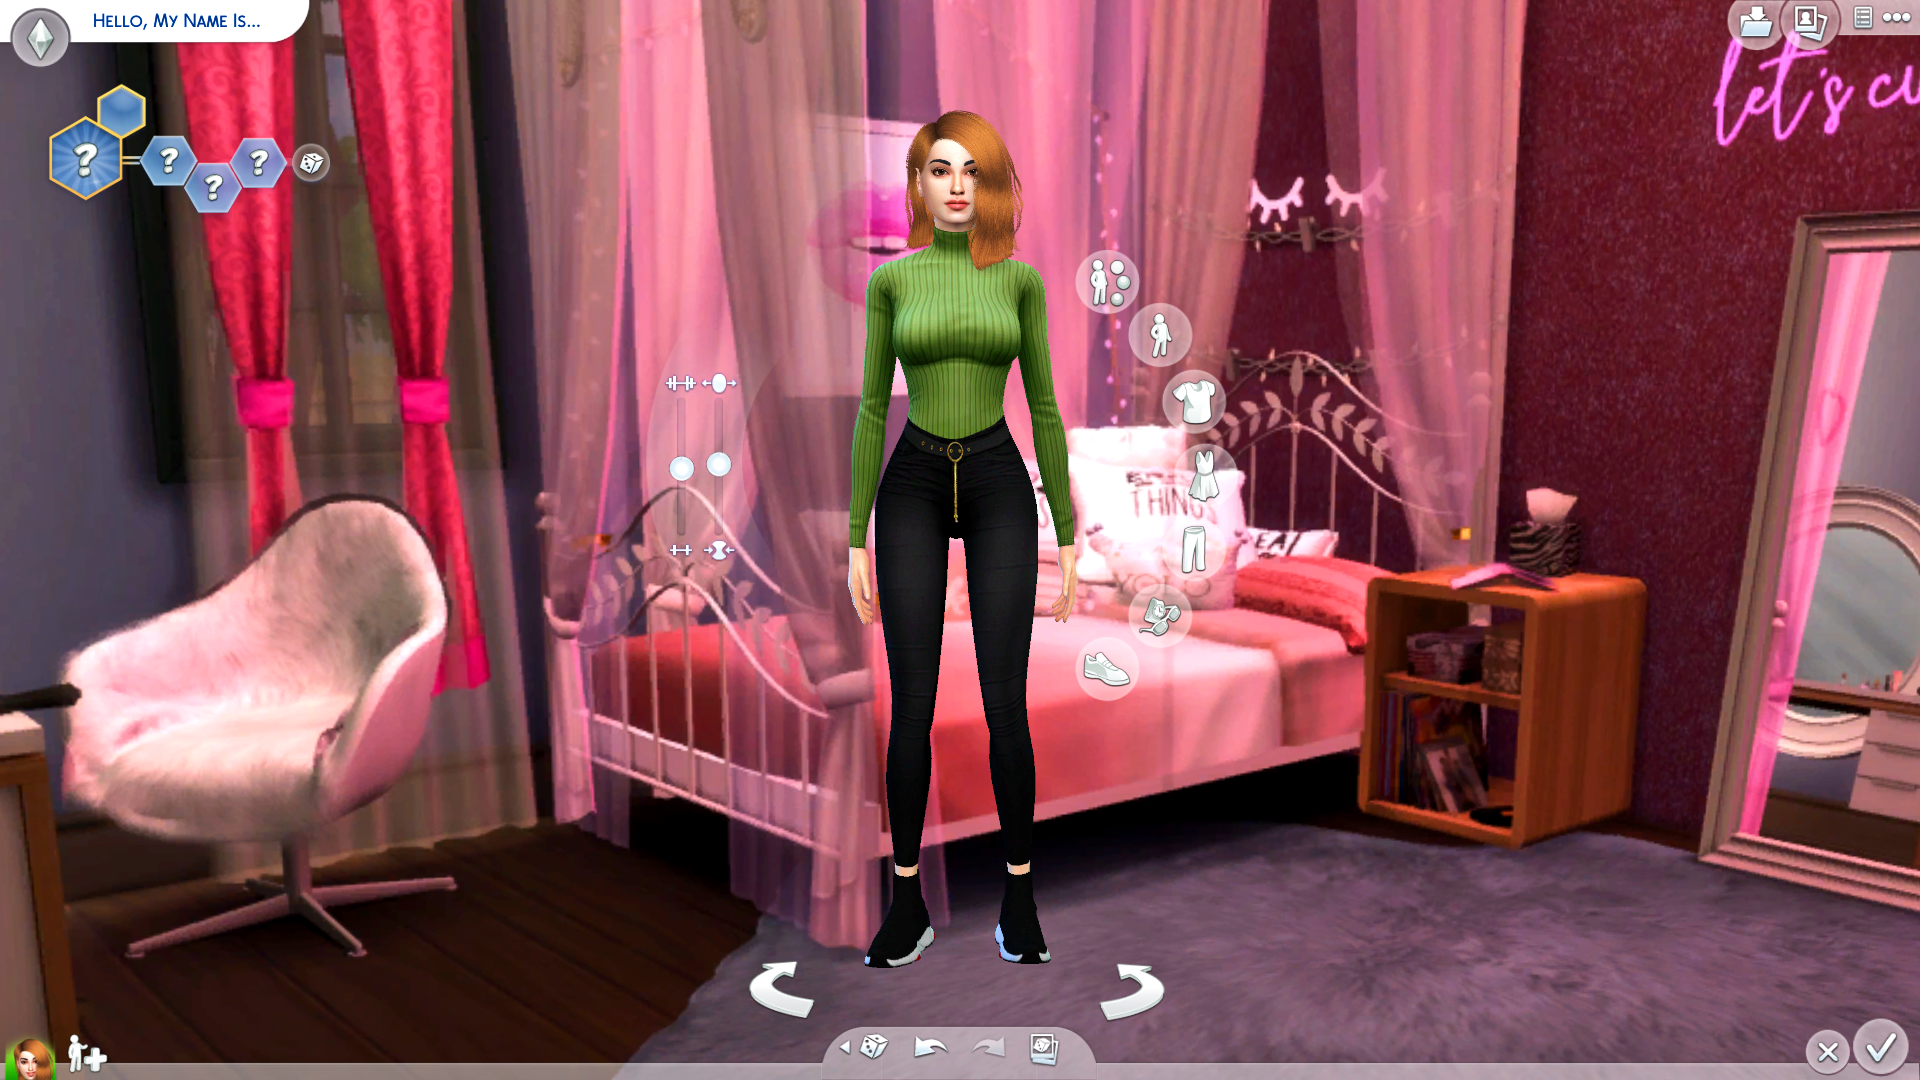 Mod The Sims - Pink Bedroom CAS Background